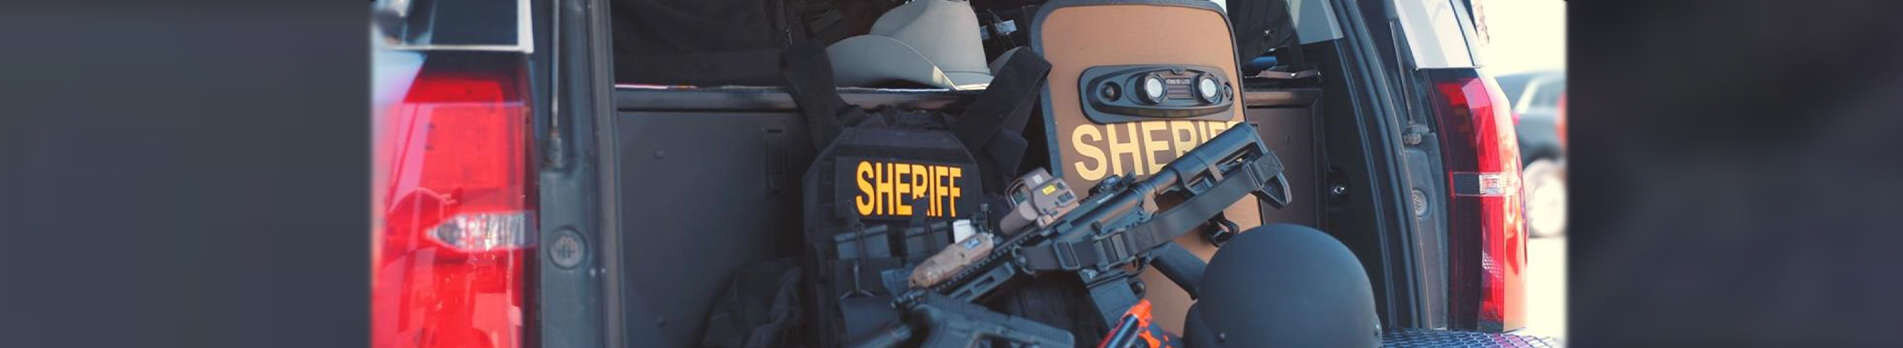 Sheriff riot gear and weapon in the back of a sheriff vehicle.